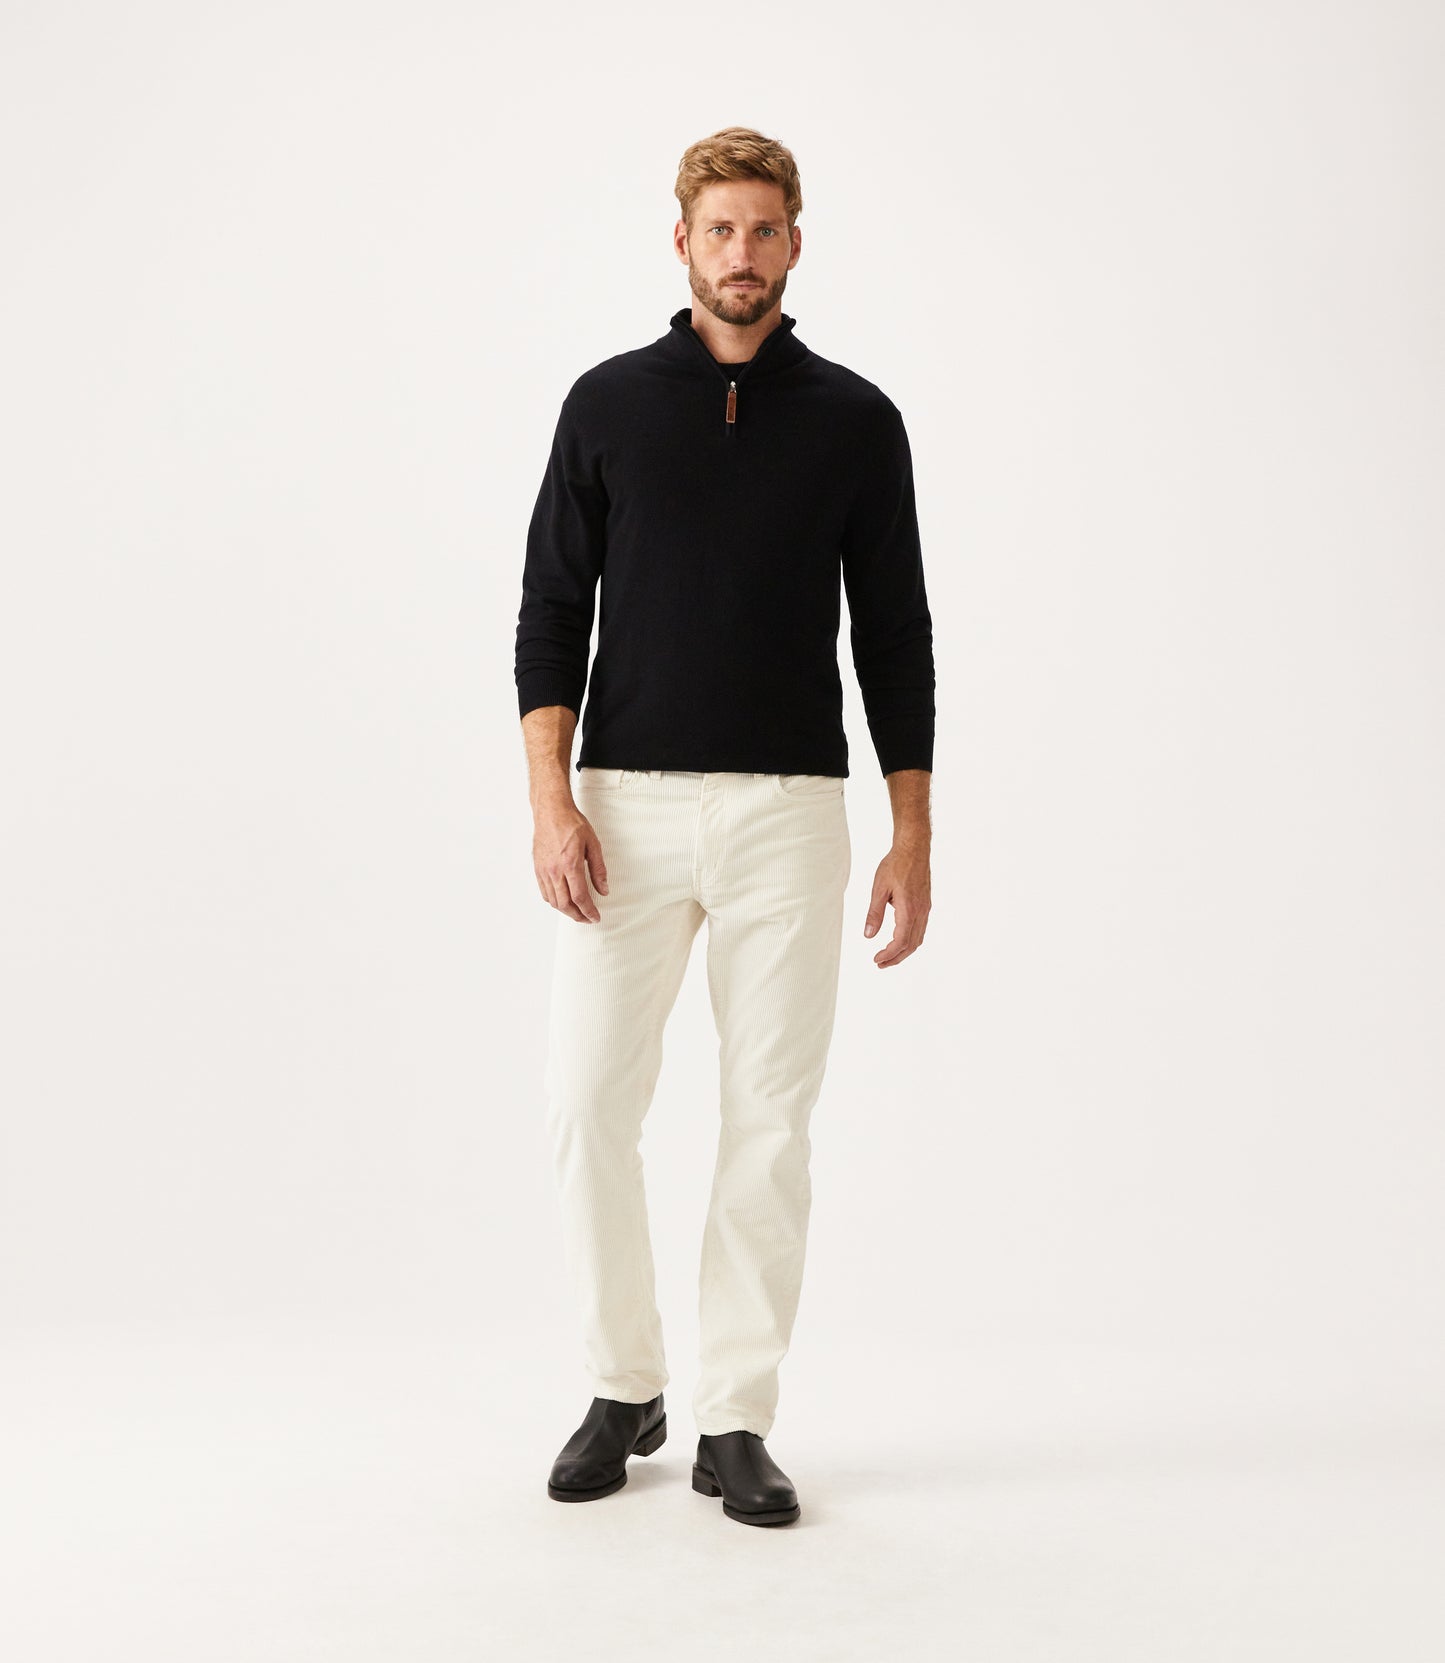 R.M Williams Knitwear, The Ernest Sweater in Black